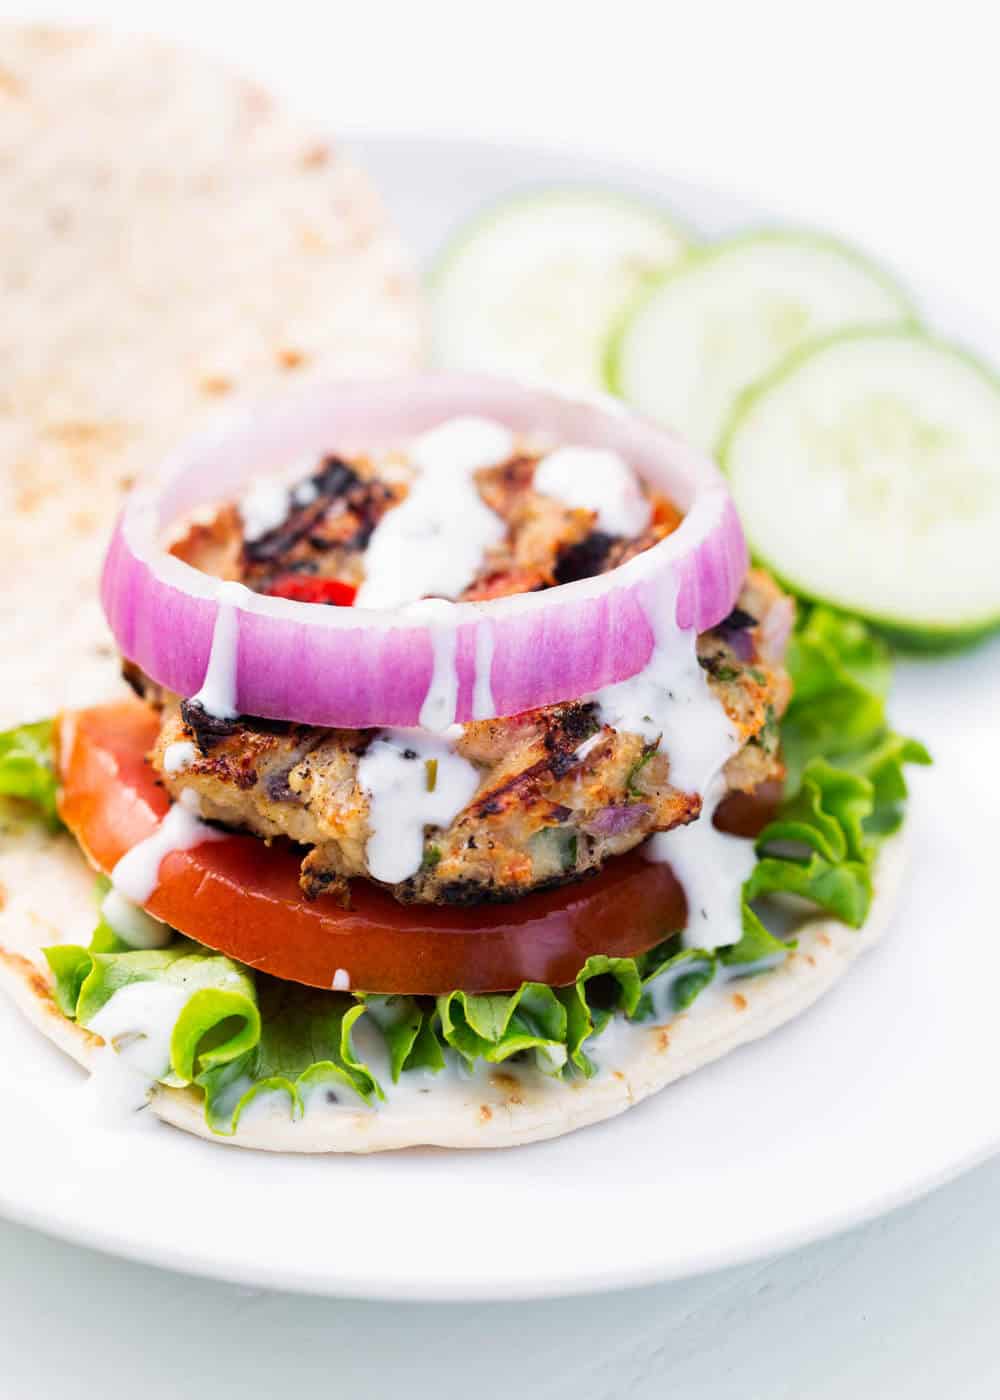 Greek chicken burger on a flatbread with lettuce, tomato and onion.